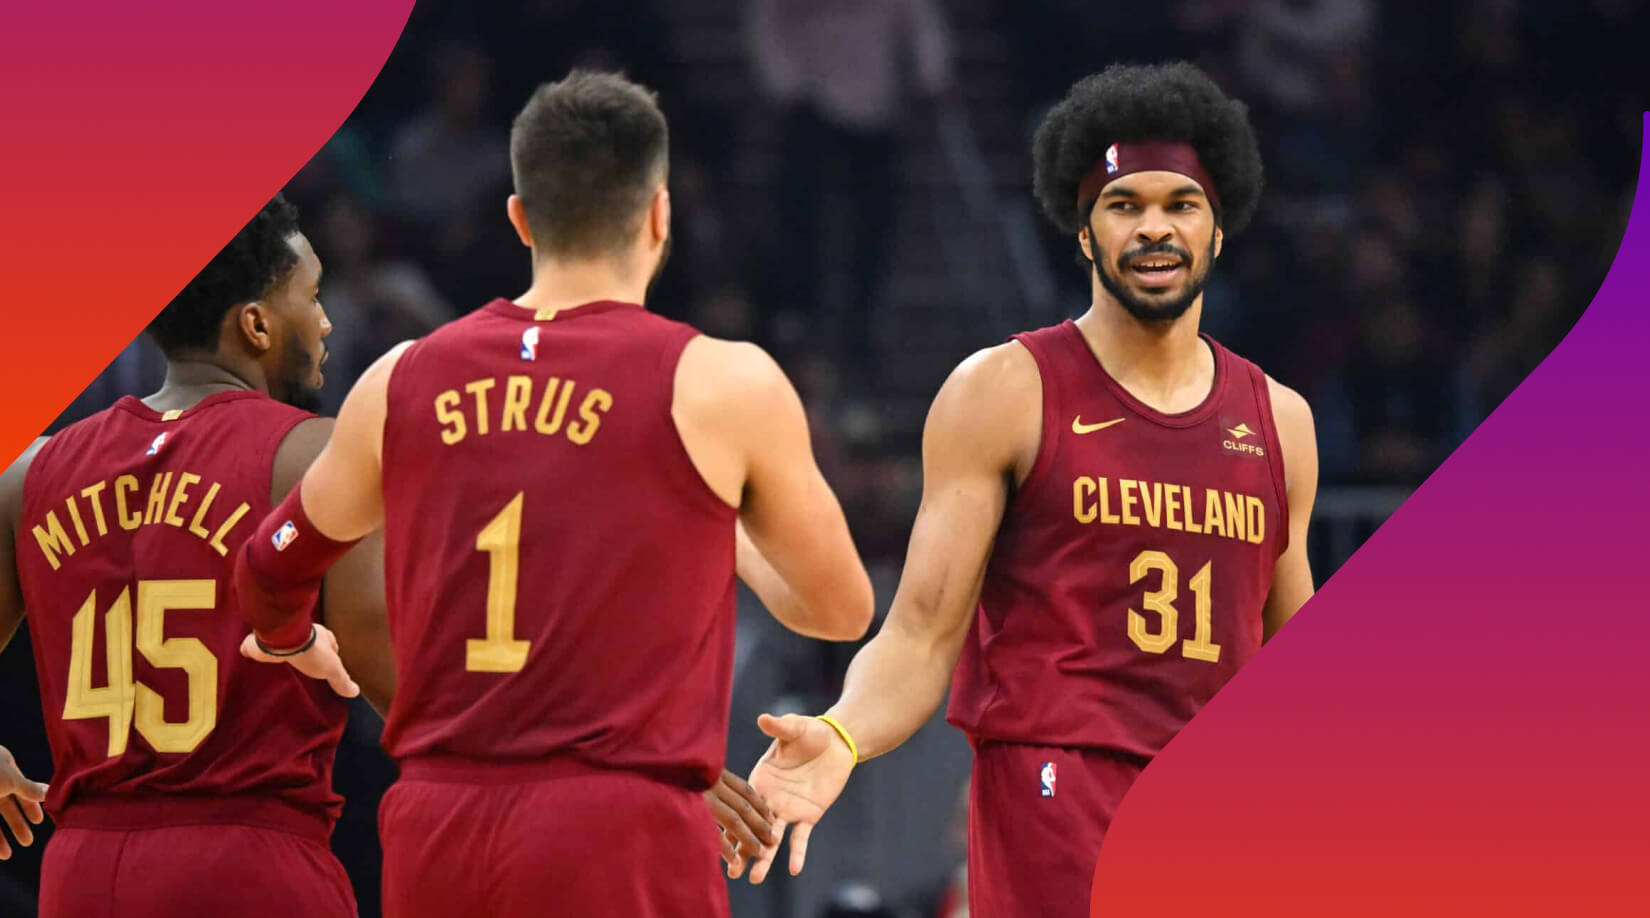 Cleveland Cavaliers Stunning Success - Are They a Contender?